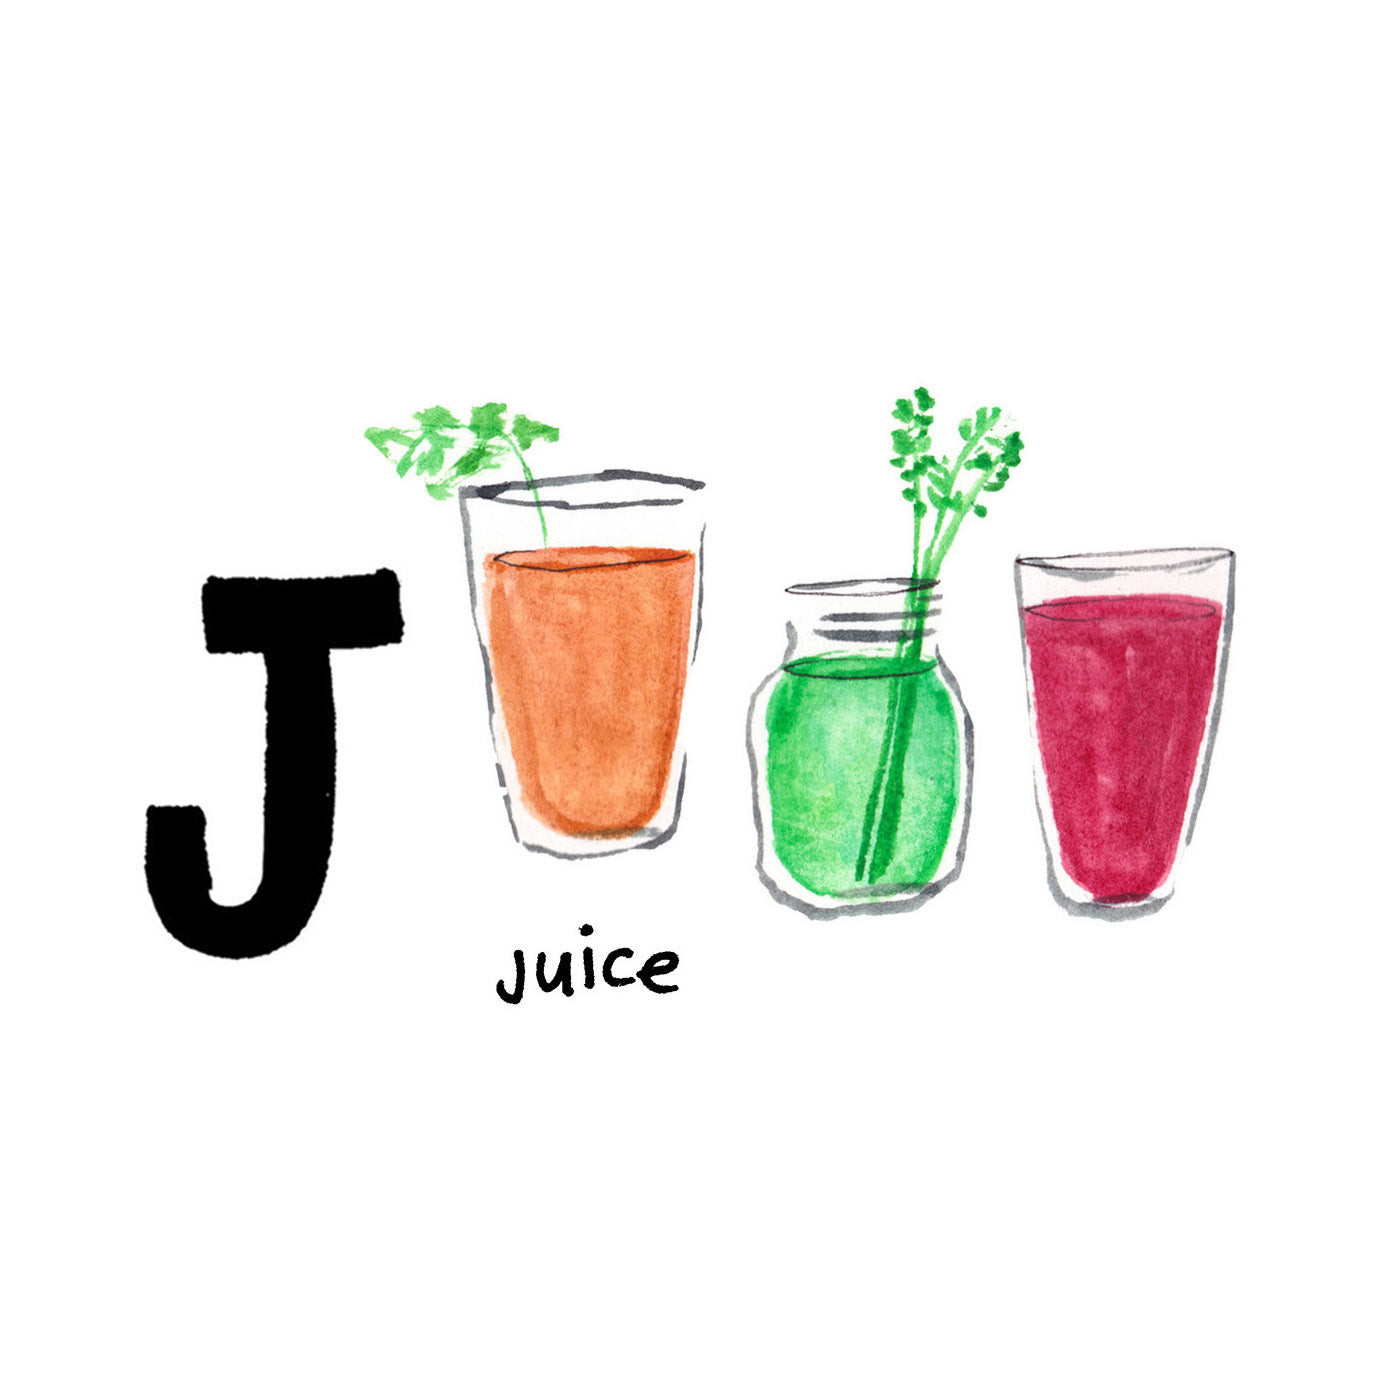 J is for Juice. California’s residents are wildly enthusiastic about their health conscious lifestyle. Juicing and juice cleanses have been popular since the 1970s.